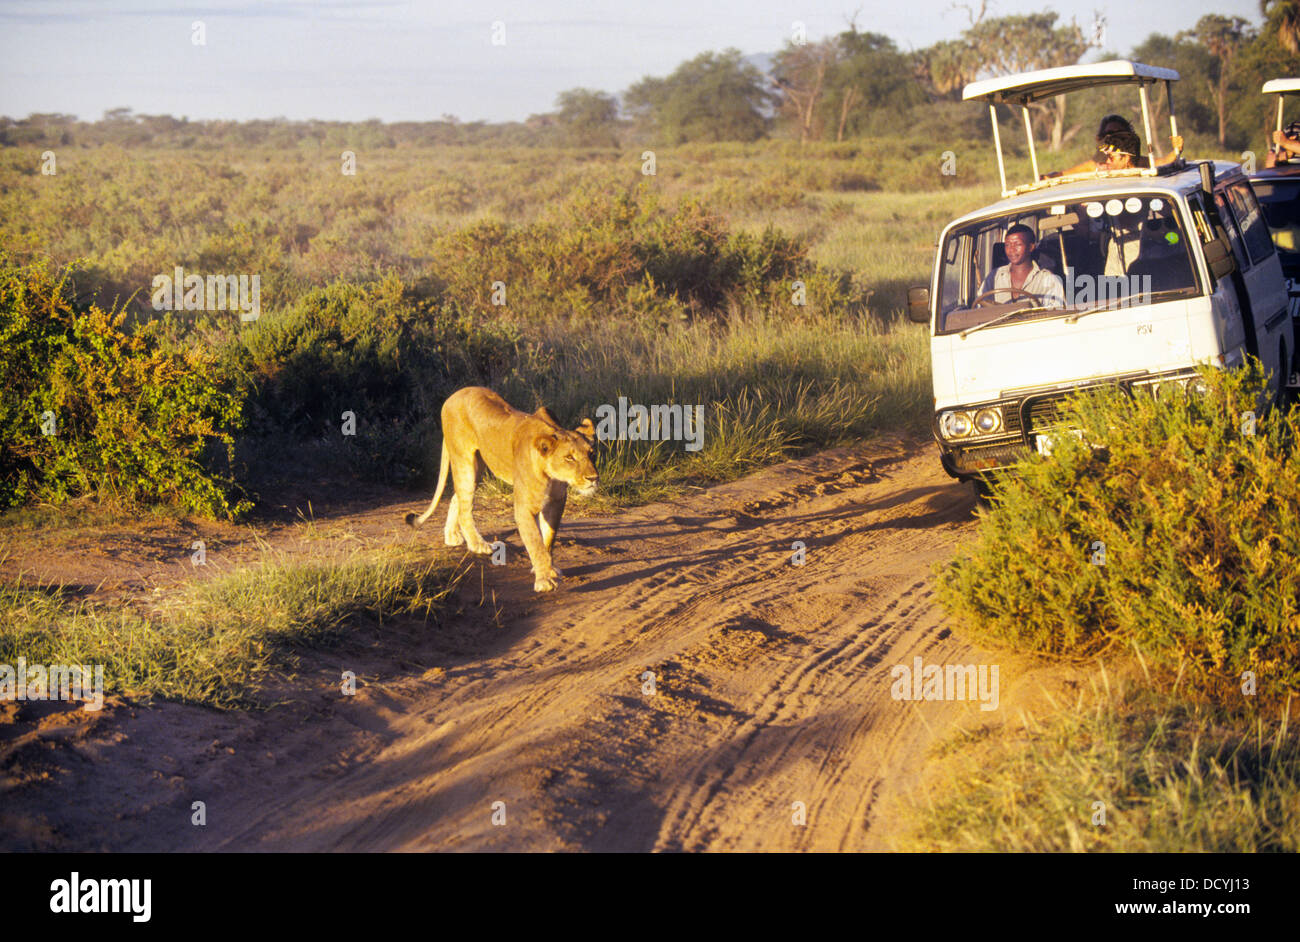 A lioness quietly hunts while being followed by a minivan filled with safari tourists in Masai Mara park kenya Stock Photo